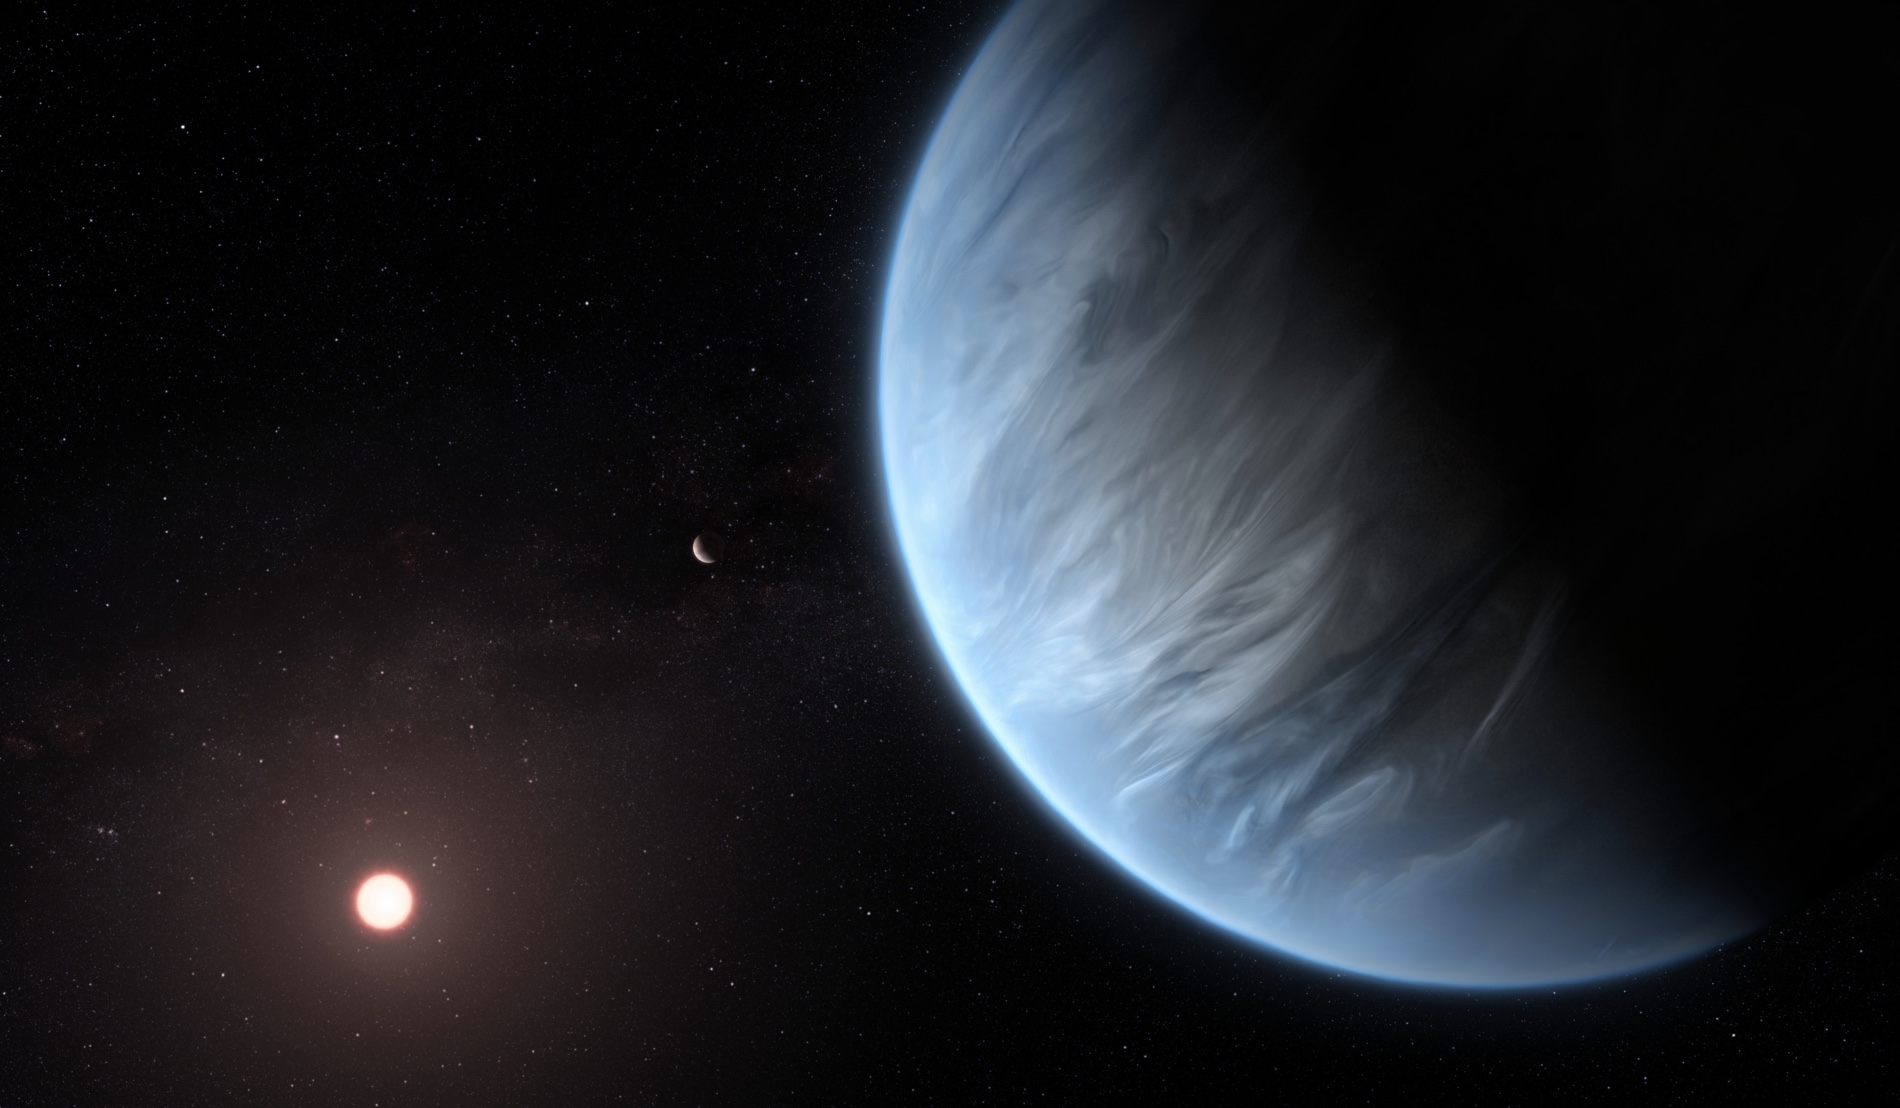 An artist's interpretation of the potentially ocean-covered exoplanet K2-18 b, which is around 120 light-years from Earth.